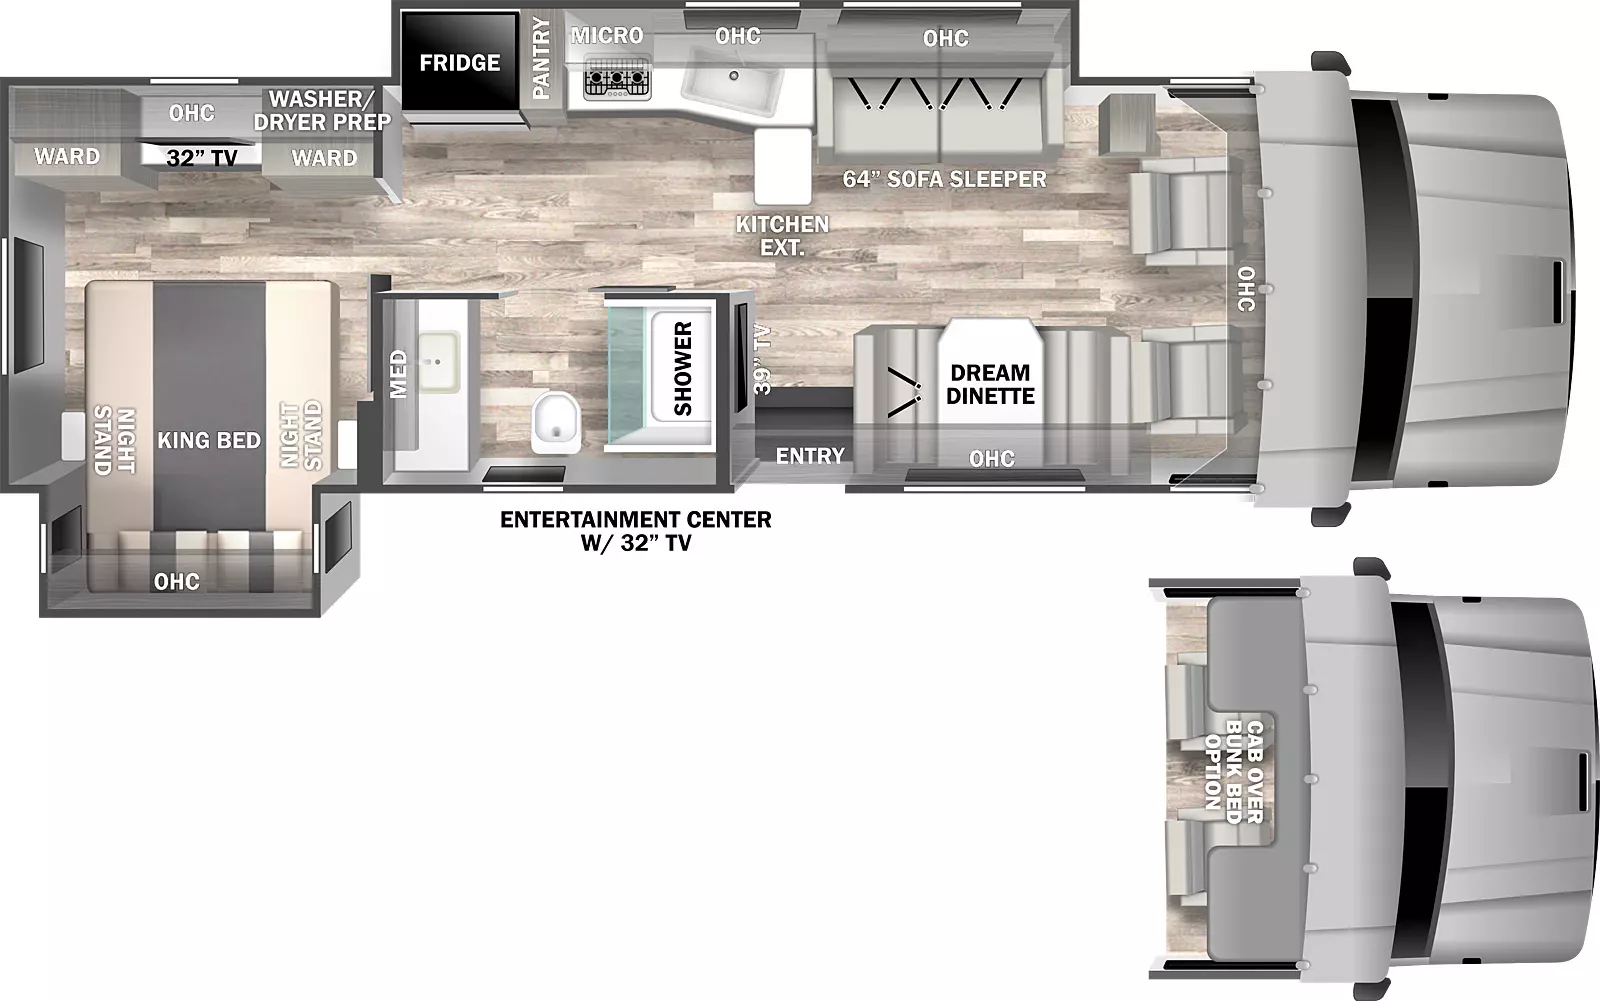 The 32KD has 2 slide outs, one entry door, and exterior TV on door side. Interior layout from front to back: Overhead cabinets above cockpit (cab over bunk option); off-door side slideout with sleeper sofa, overhead cabinets and kitchen with sink, extension countertop, microwave, stove, pantry and refrigerator; door side dream dinette, entry door, television, and side aisle full bathroom; rear bedroom with door side king bed slideout with night stands on either side and overhead cabinets, and off-door side wardrobes with washer/dryer prep, overhead cabinets and television 